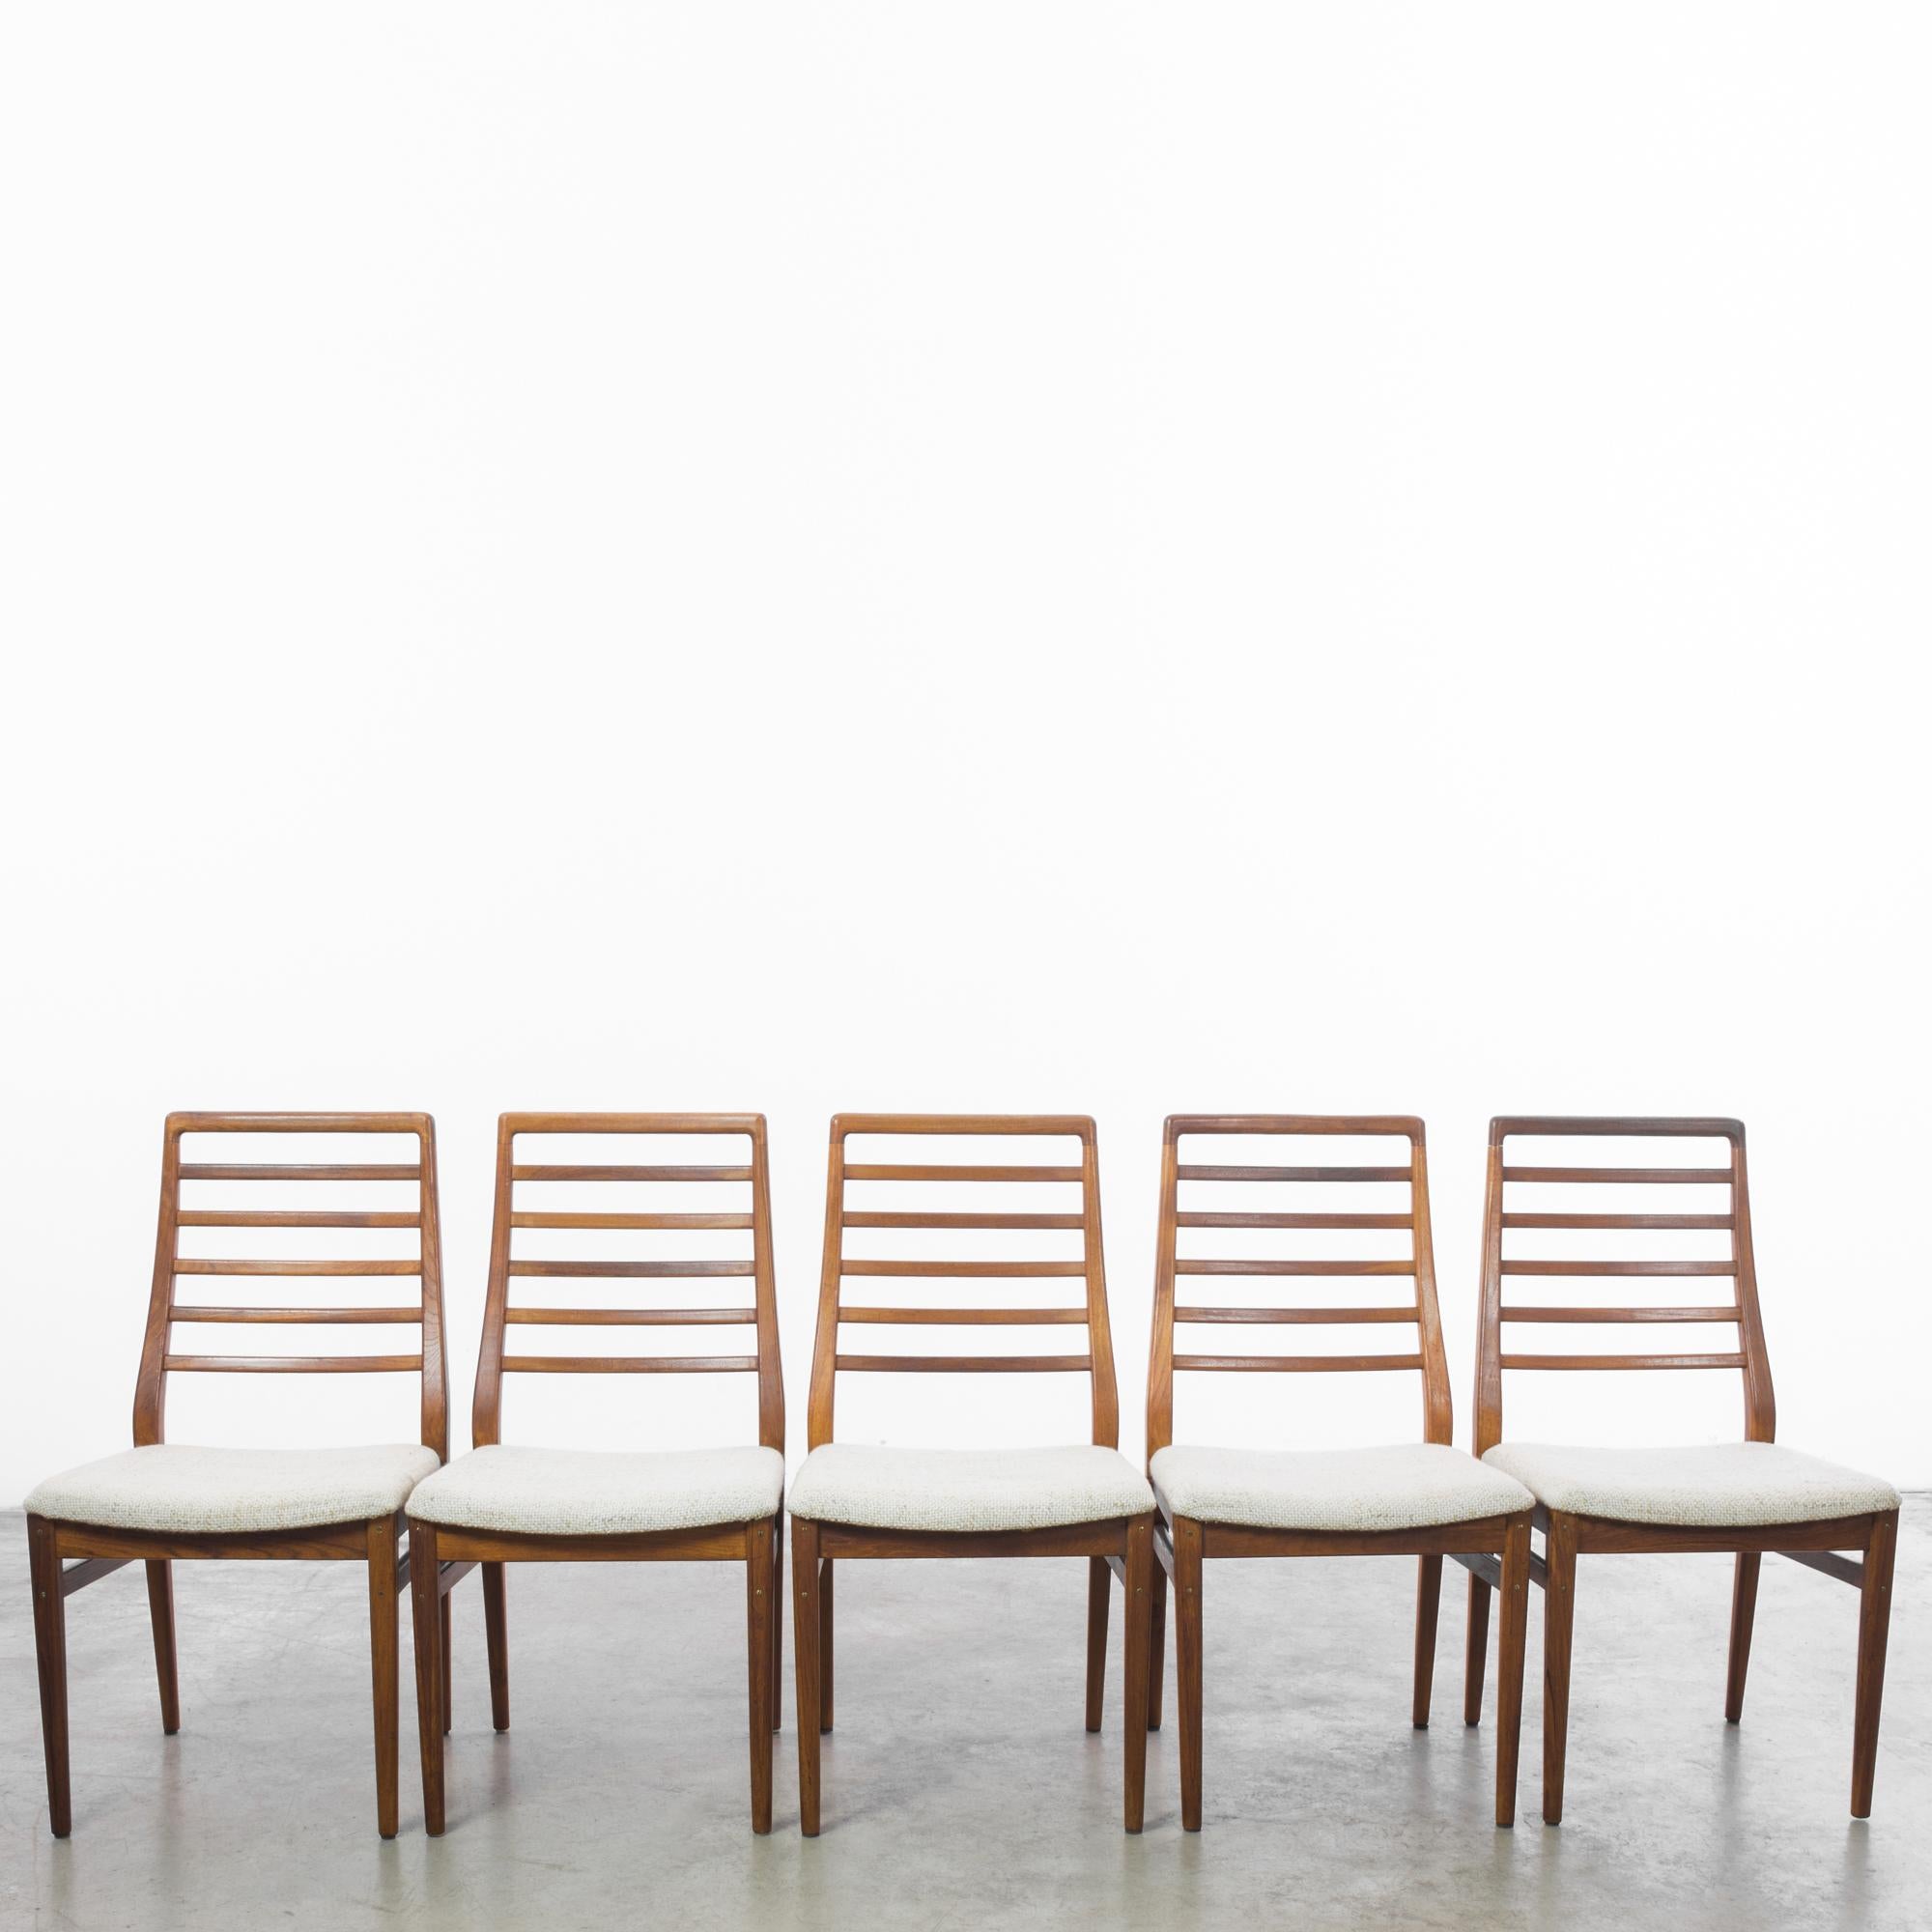 Introducing a set of five 1960s Danish Wooden Chairs, each piece a harmonious blend of form and function, embodying the minimalist elegance of mid-century design. Crafted with the precision of Danish craftsmanship, these chairs feature clean lines